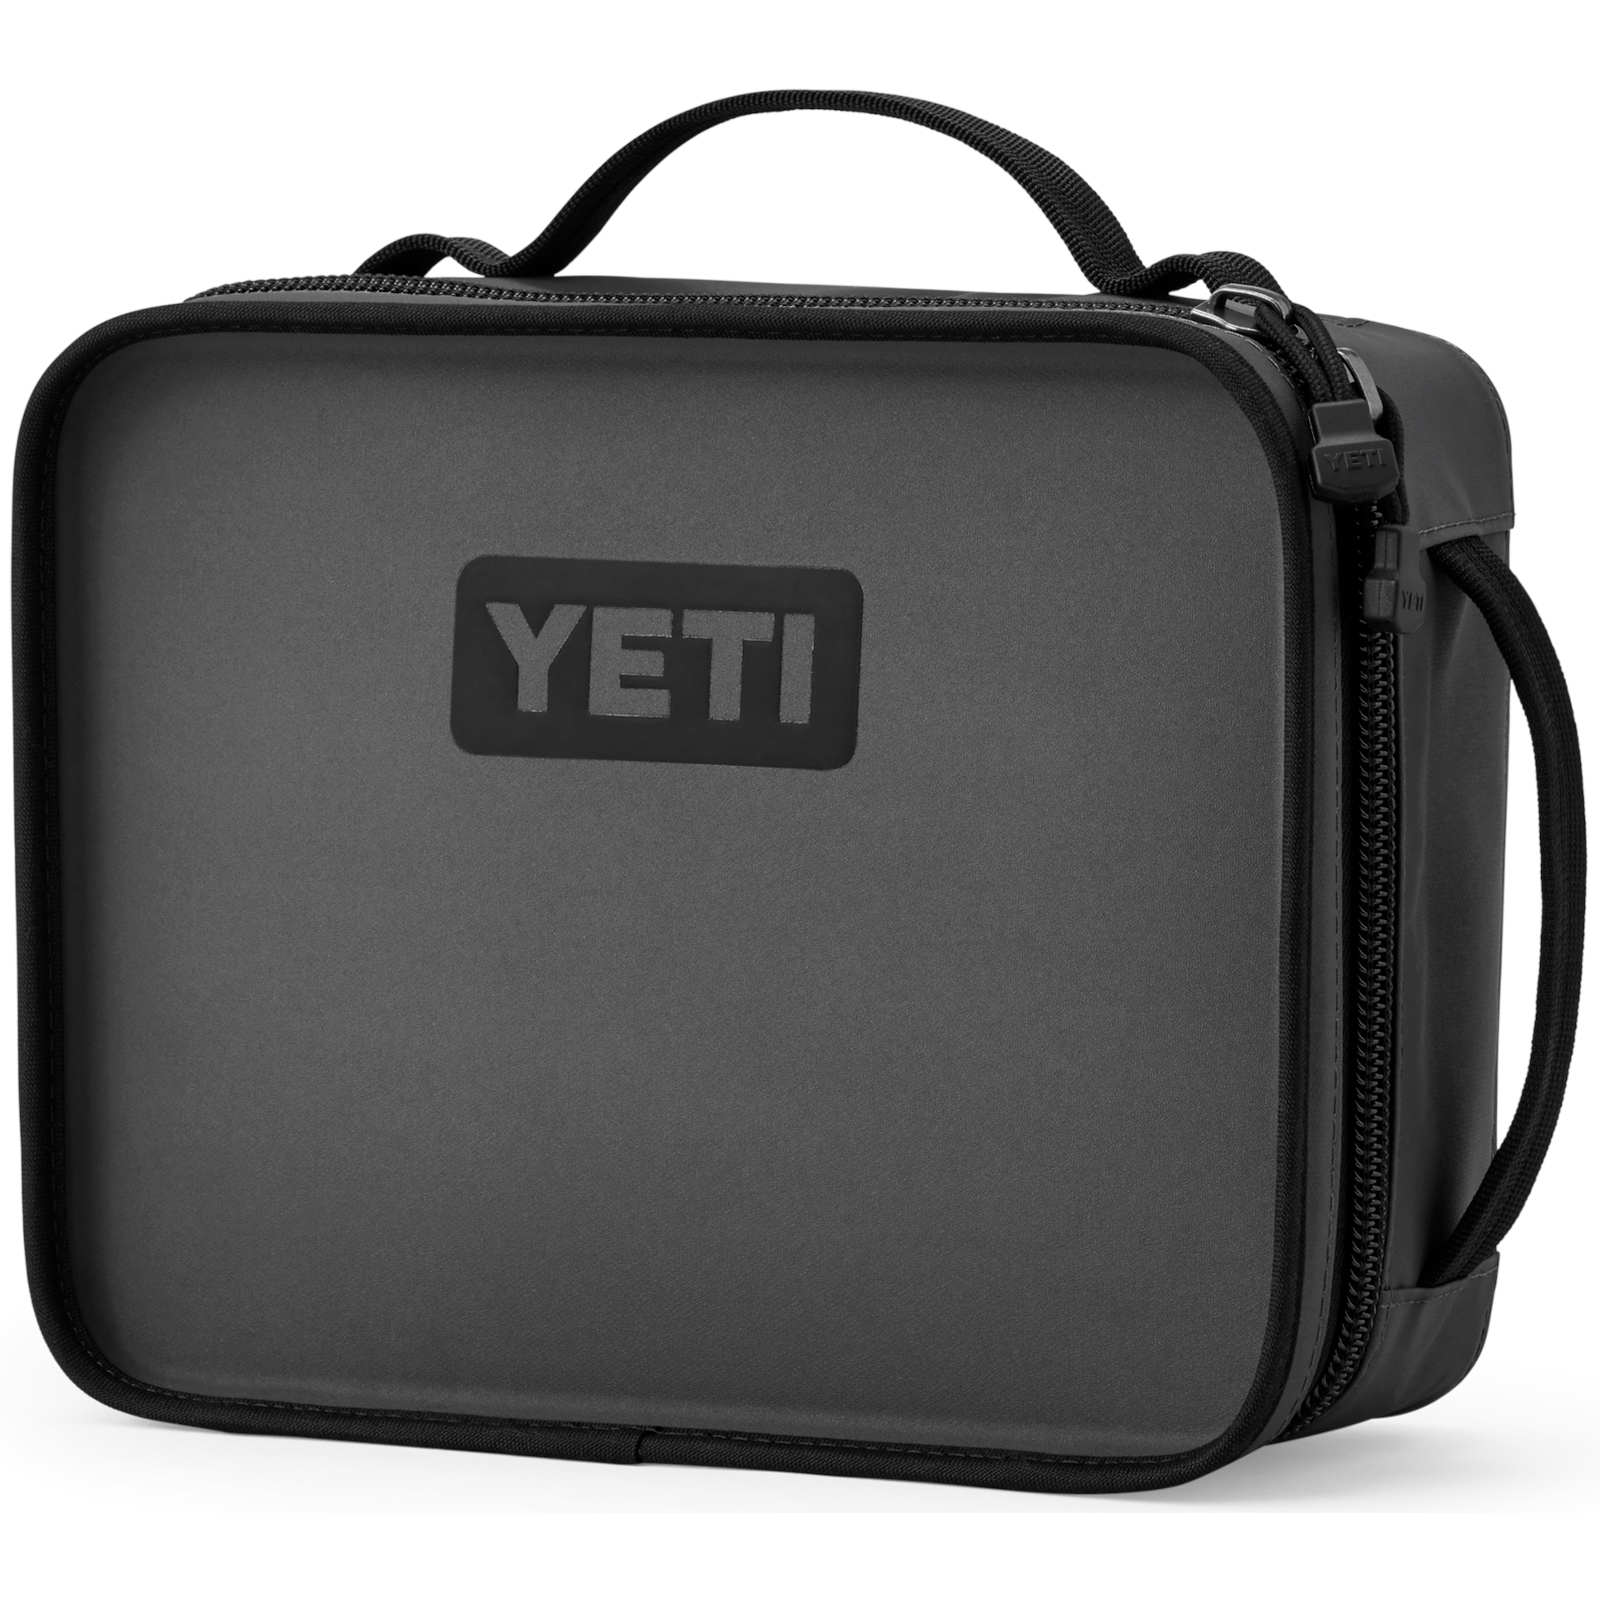 Yeti Day Trip Charcoal Gray Lunch Box Standing Angle View